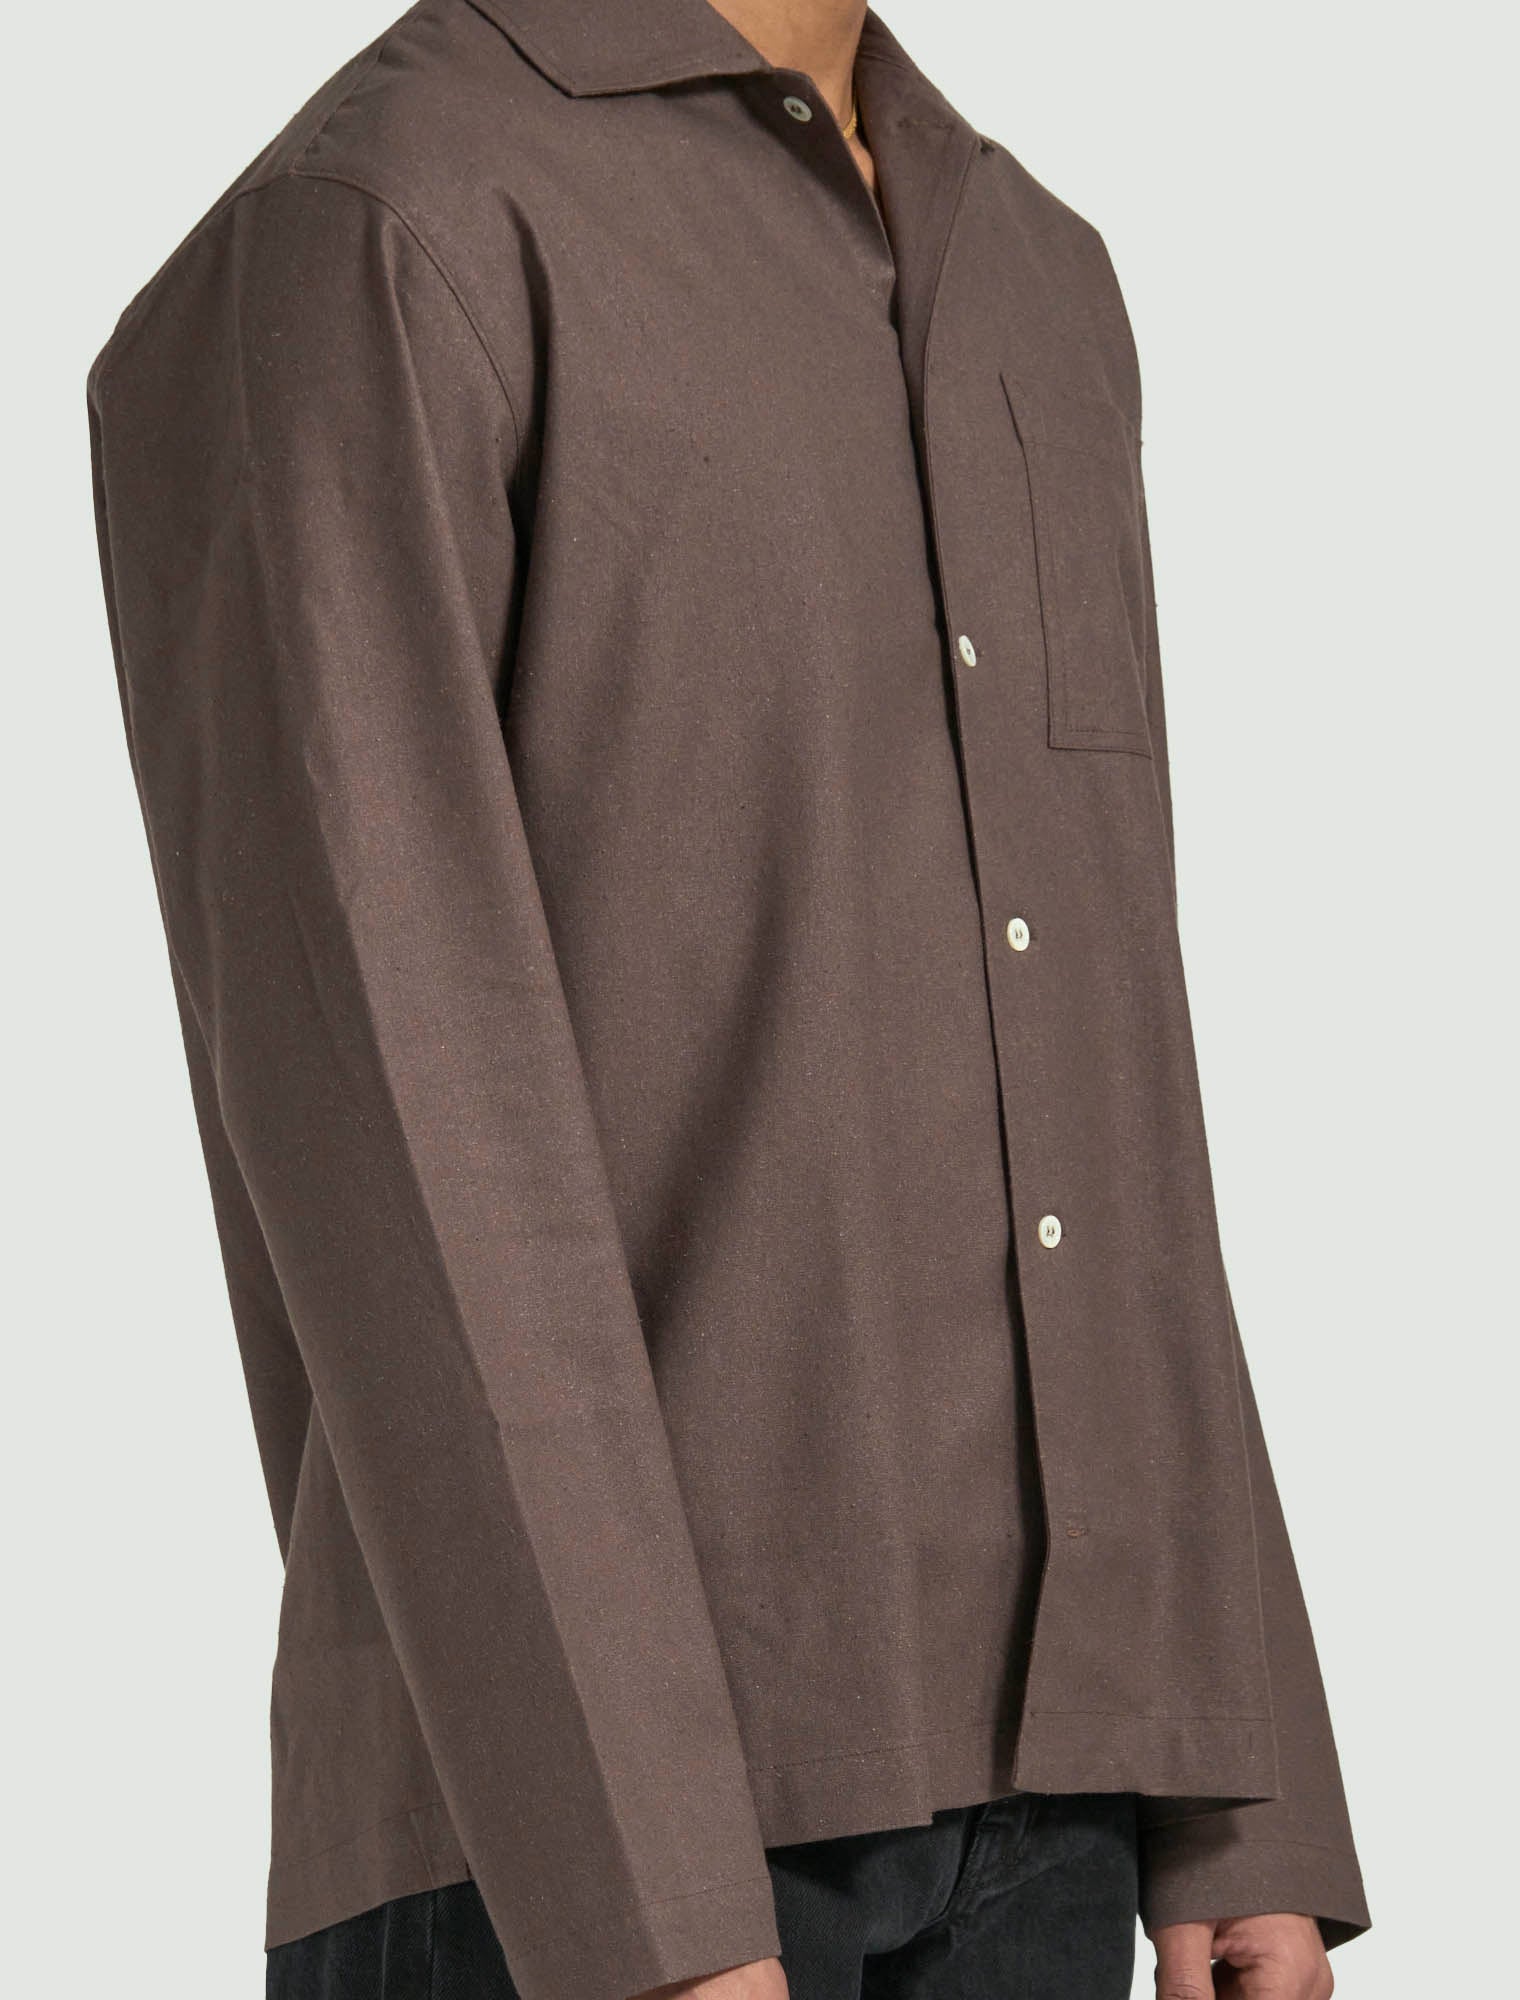 Another Shirt 2.1 - Brown